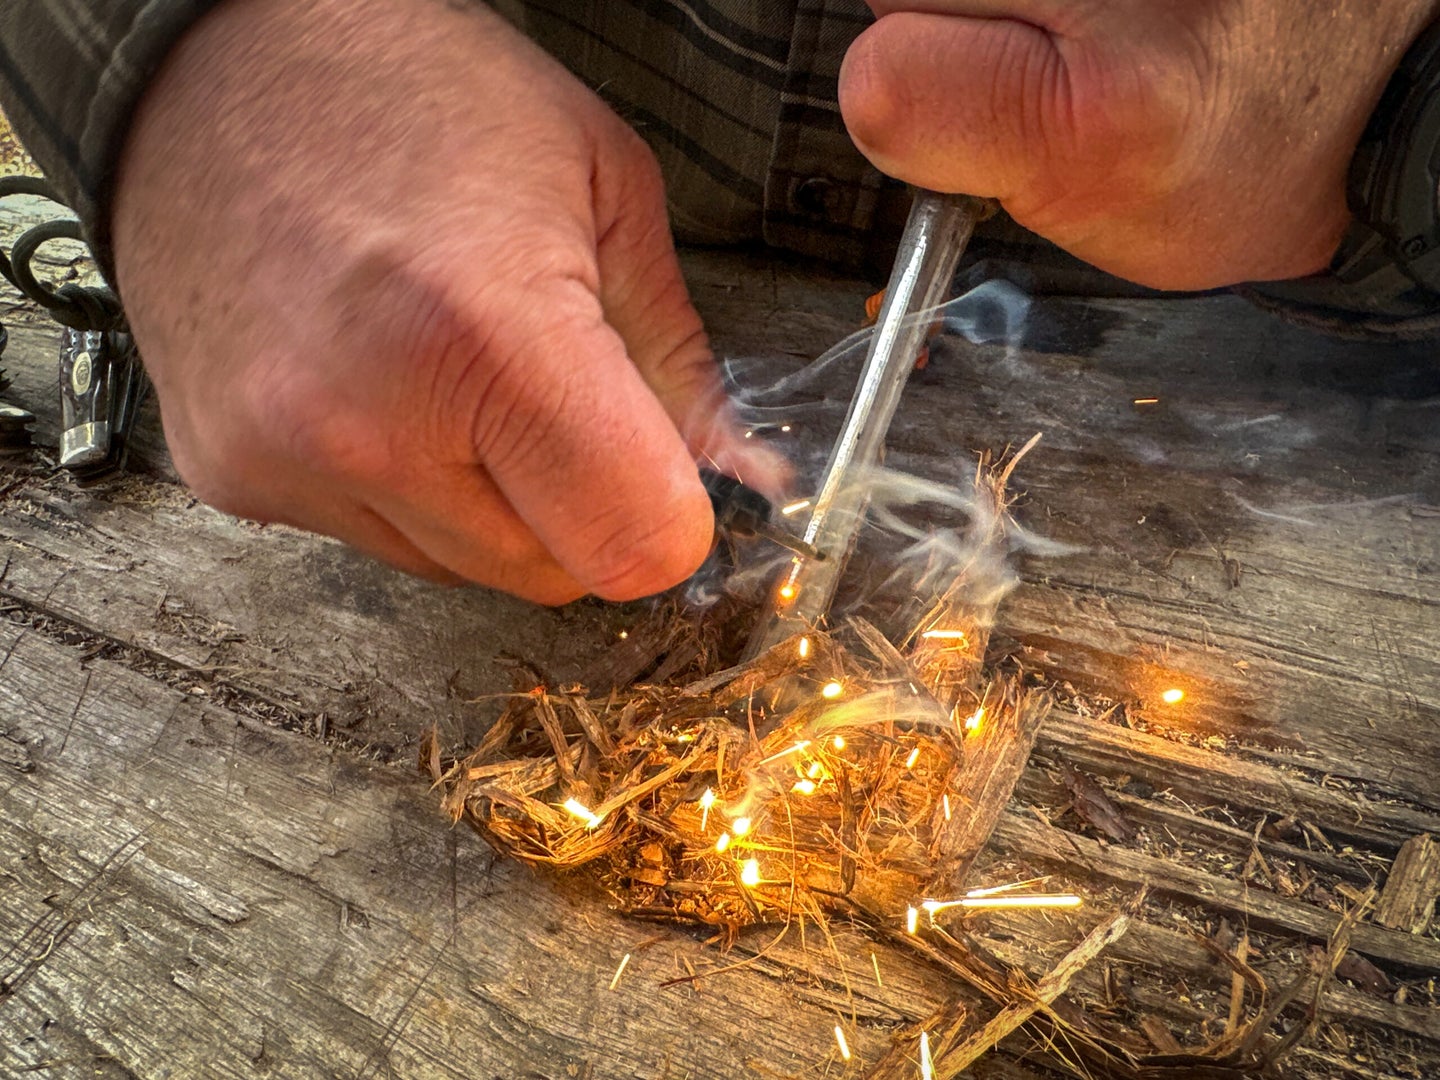 Using a ferro rod to spark fire onto a bundle of tinder